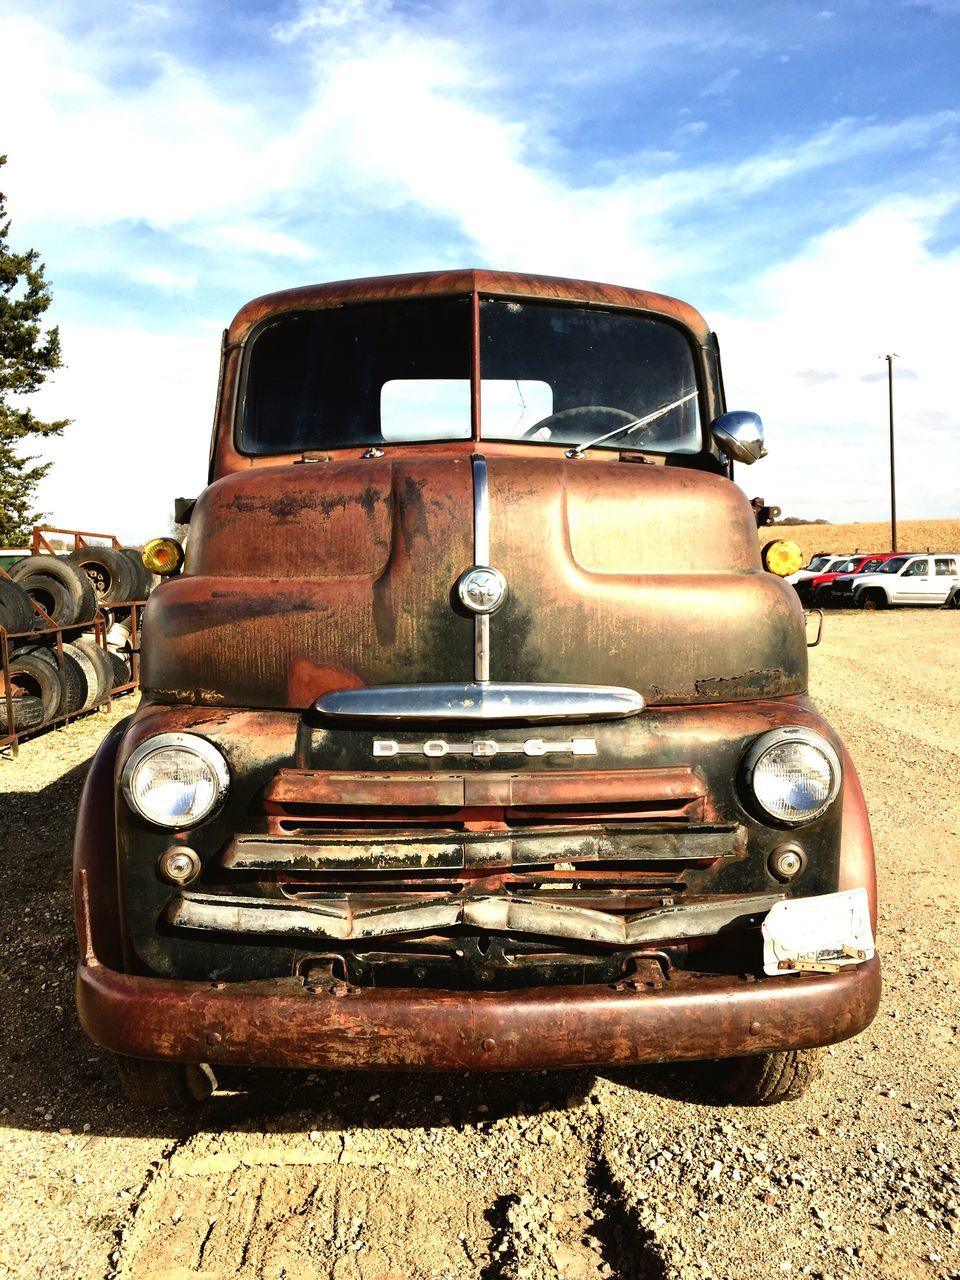 transportation, mode of transport, land vehicle, old, abandoned, obsolete, cloud, sky, rusty, front view, damaged, stationary, sunny, day, outdoors, deterioration, weathered, ruined, the past, cloud - sky, wreck